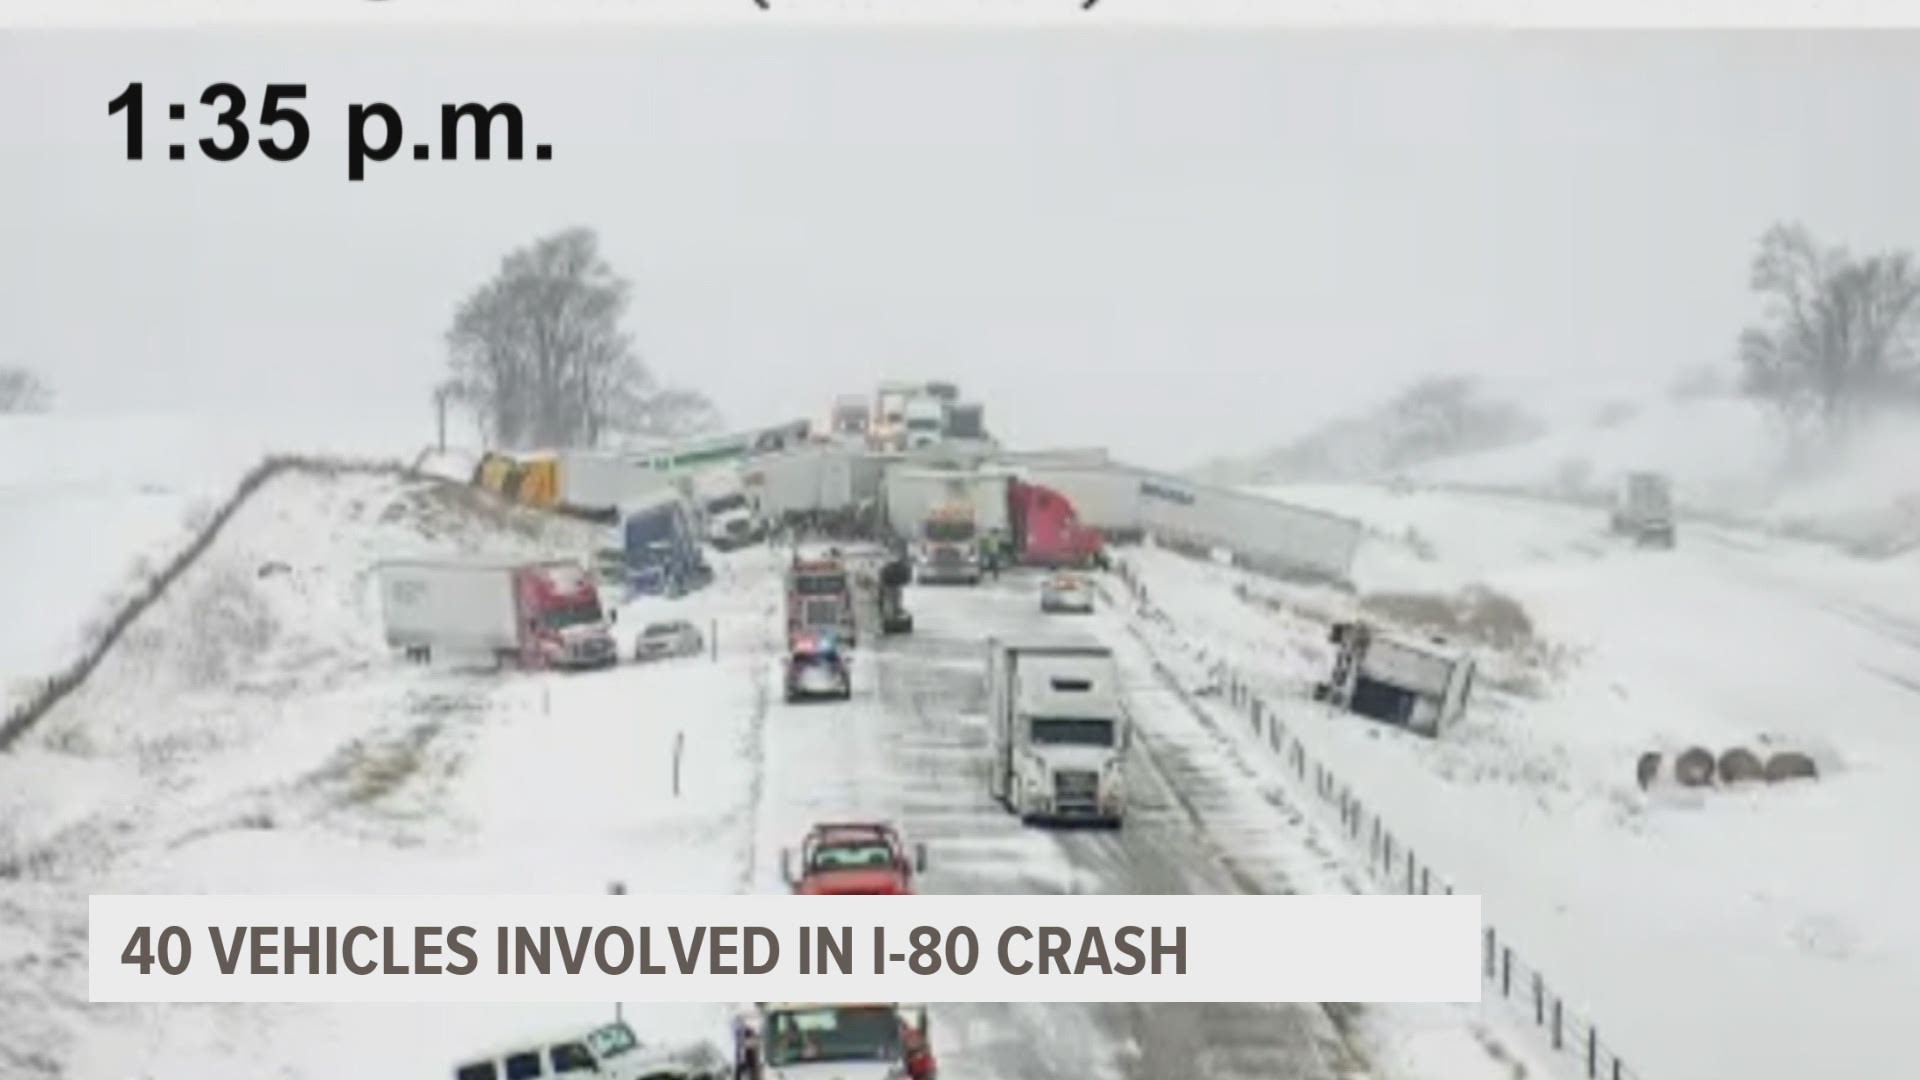 Winter weather conditions caused multiple vehicles to crash on I-80 near Newton Thursday morning. Some tips to keep in mind to avoid accidents like this.